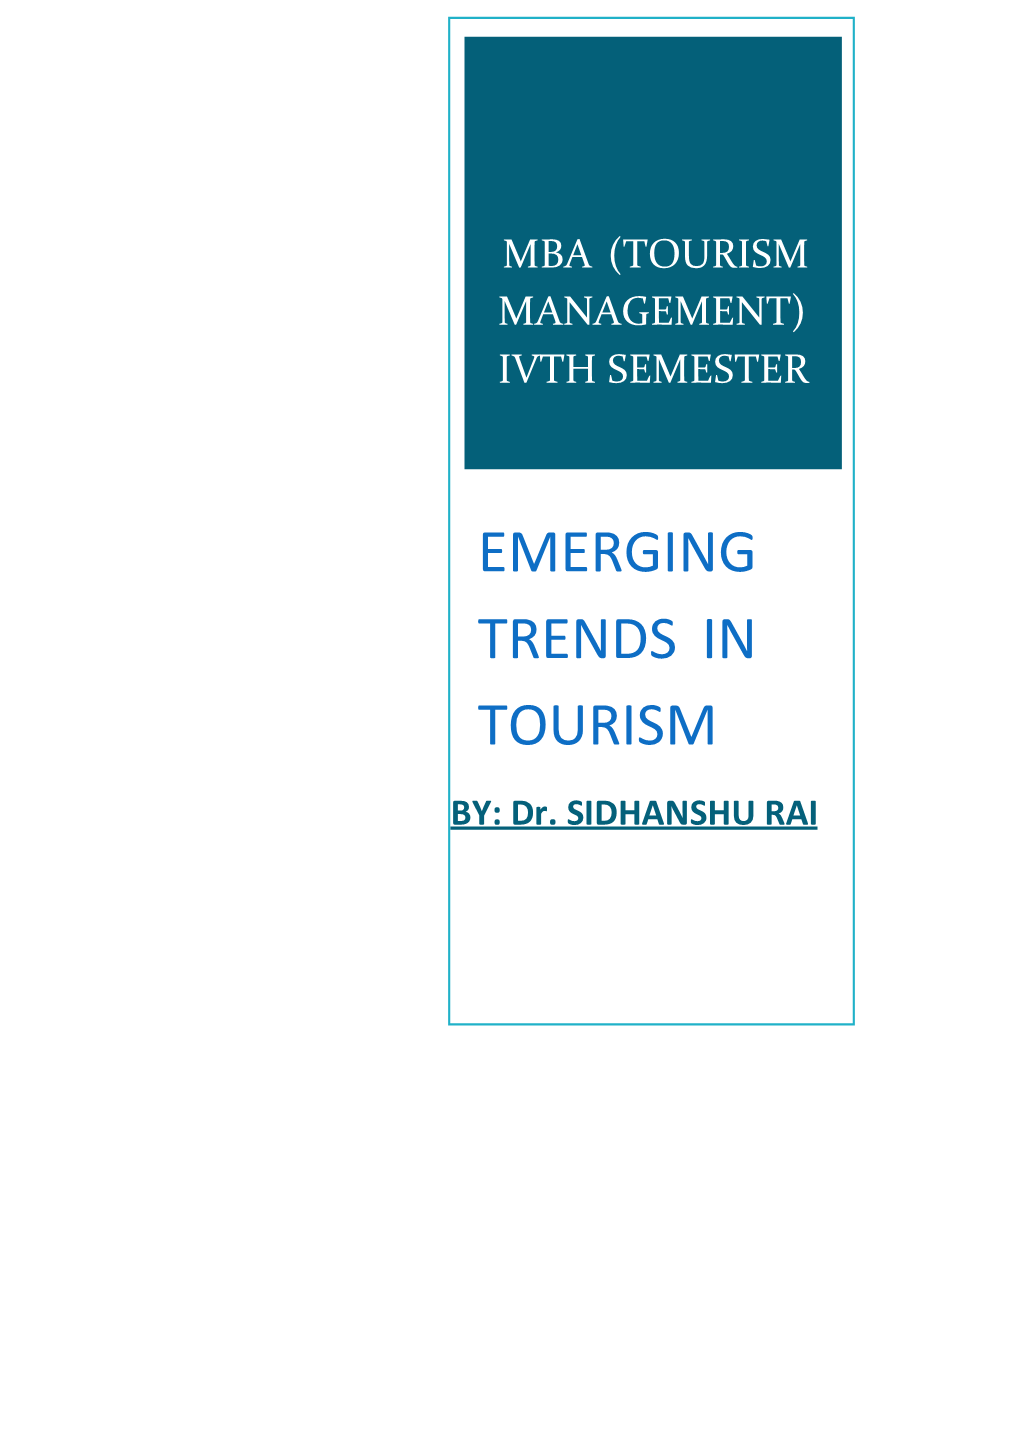 EMERGING TRENDS in TOURISM BY: Dr